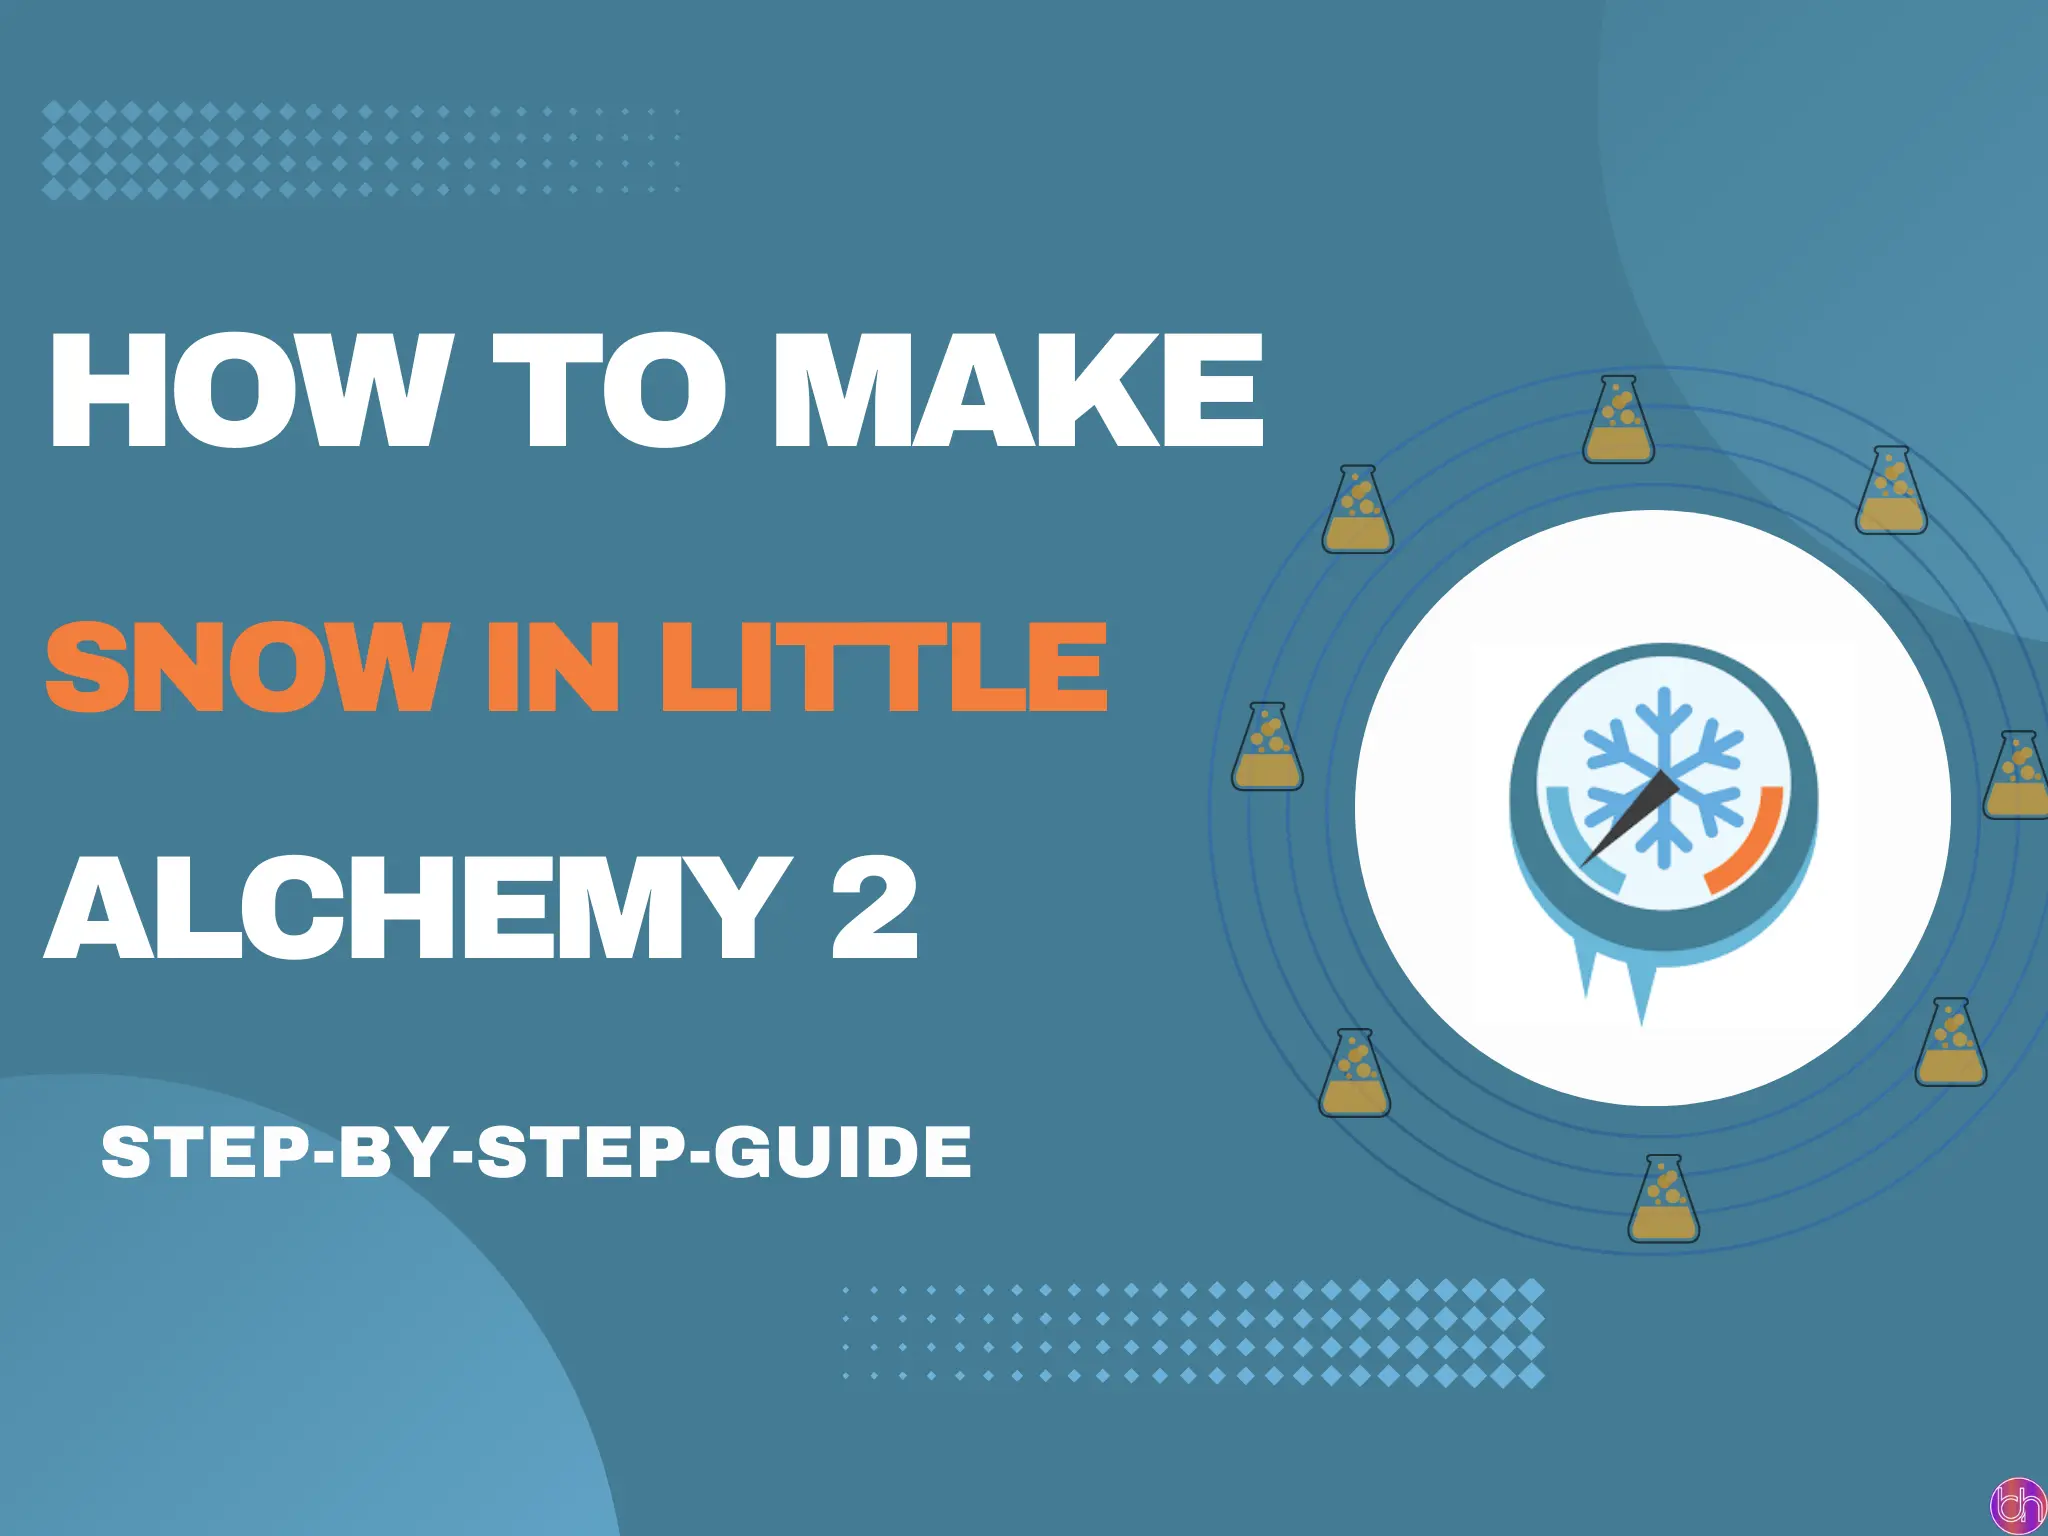 How to make snow in little alchemy 2